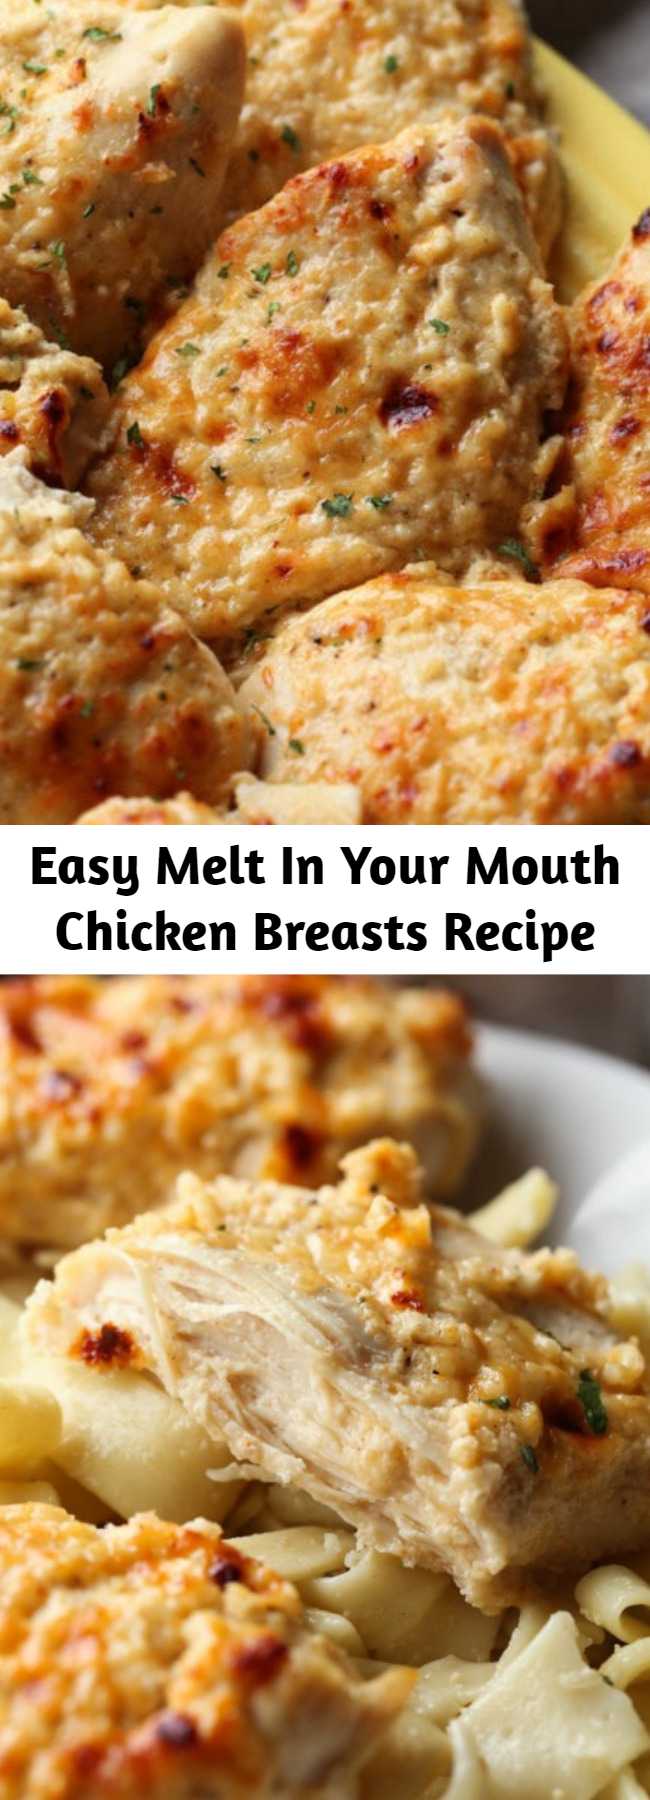 Easy Melt In Your Mouth Chicken Breasts Recipe - MIYM Chicken is a family favorite dinner. Simple, flavorful, and tender chicken recipes are always a welcome addition in my weeknight dinner rotation! Simply top the chicken with the cheese mixture and bake. The entire family will love this quick and easy recipe! #chicken #dinnerideas #easydinner #familymeals